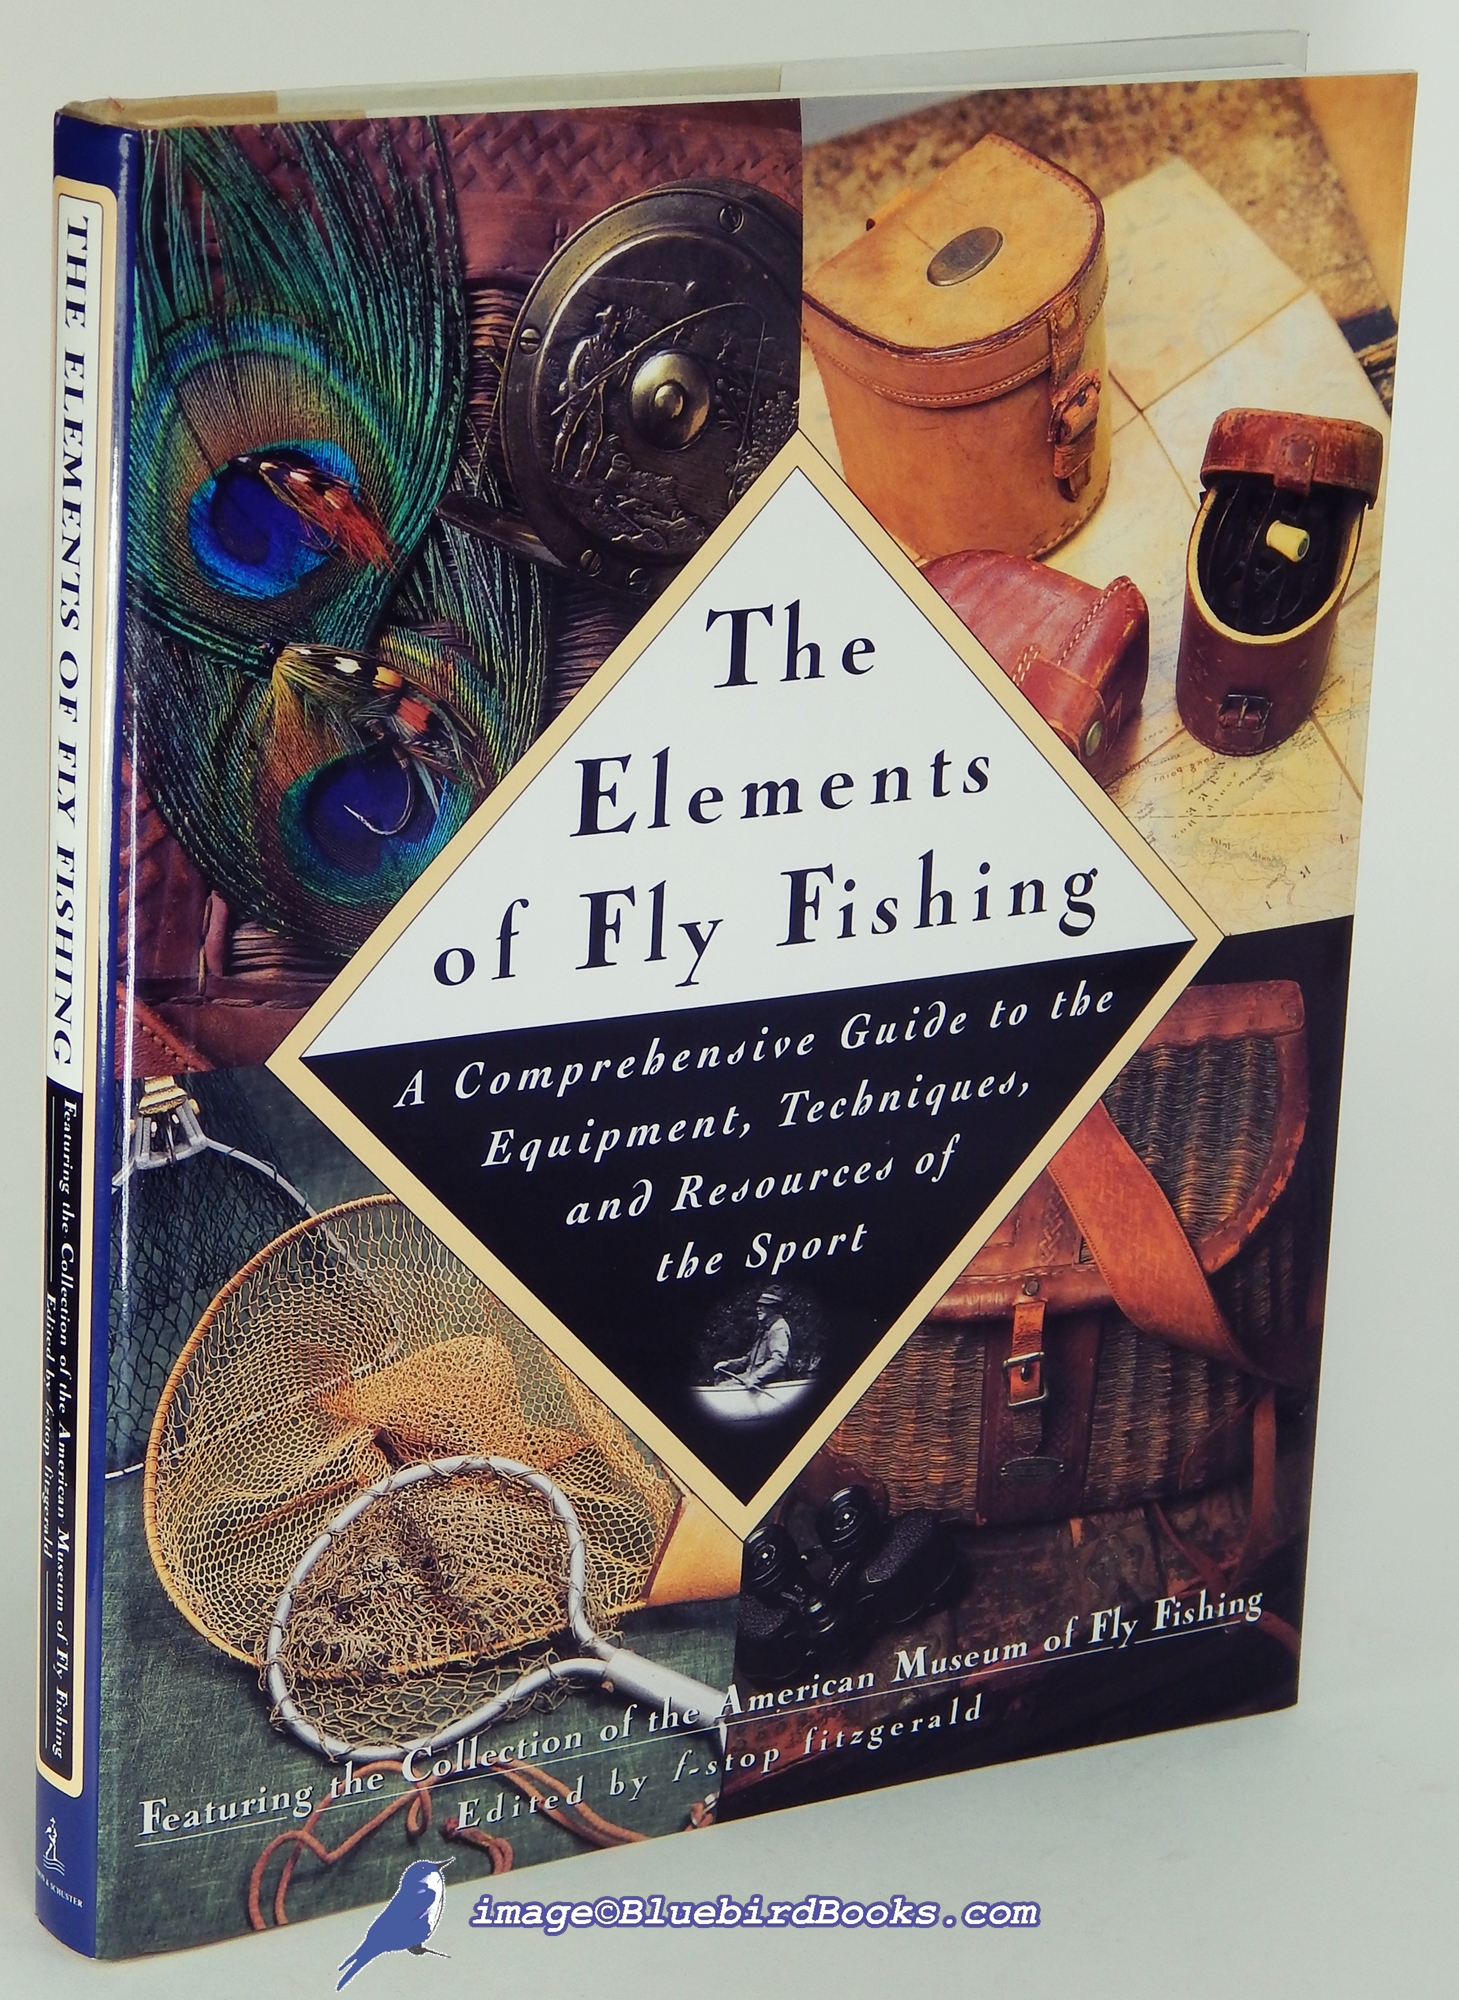 The Elements of Fly Fishing: A Comprehensive Guide to the